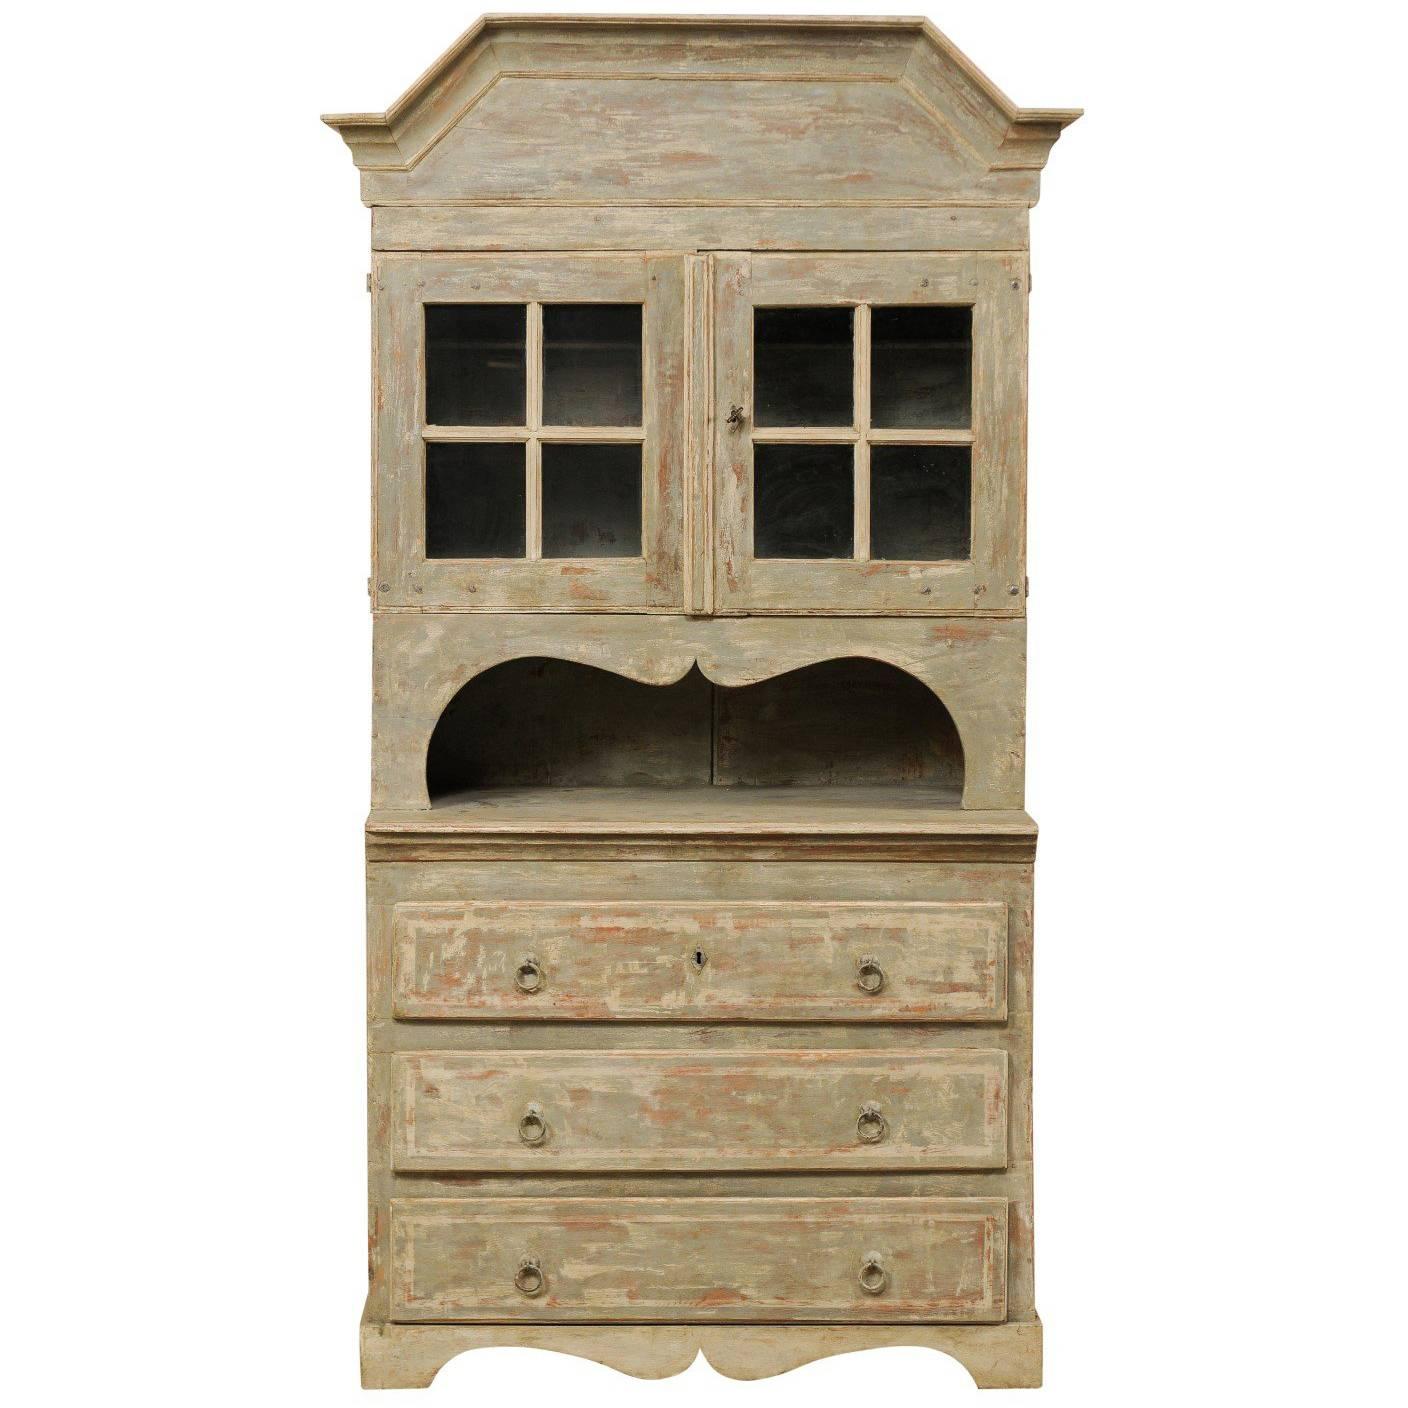 Early 19th Century Swedish Scraped Finish Cupboard with Elegant Scalloped Shapes